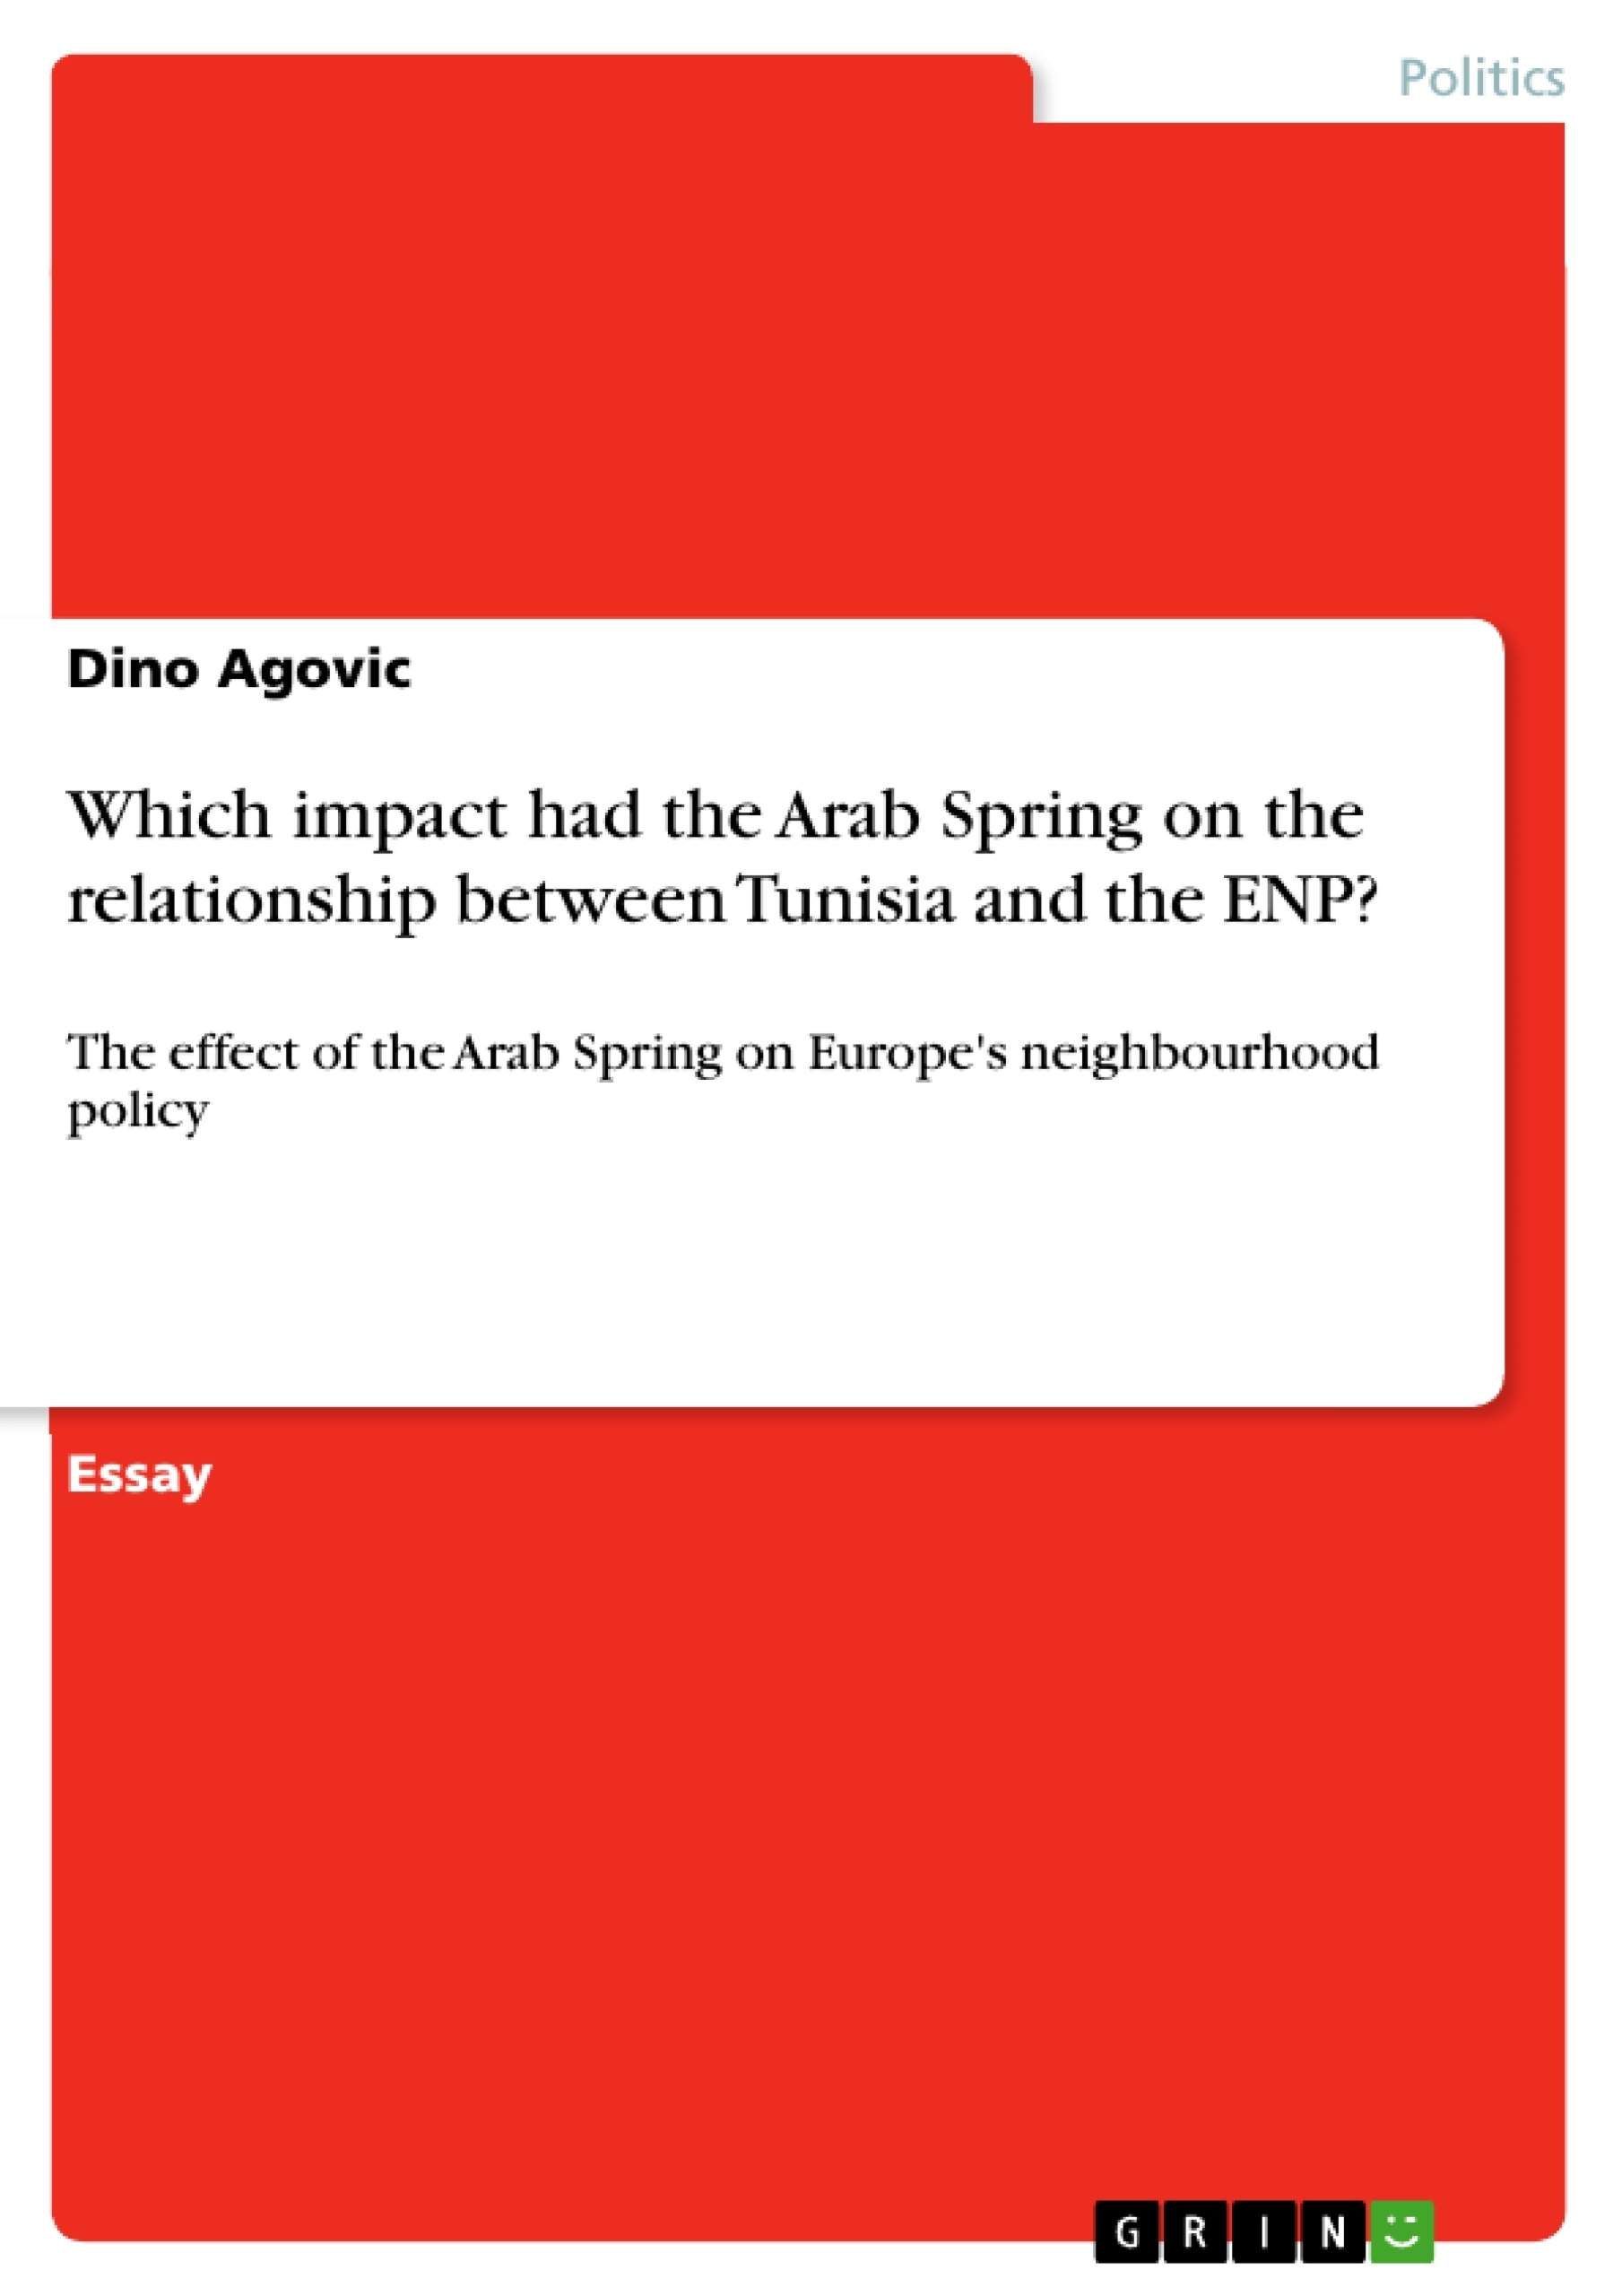 Título: Which impact had the Arab Spring on the relationship between Tunisia and the ENP?